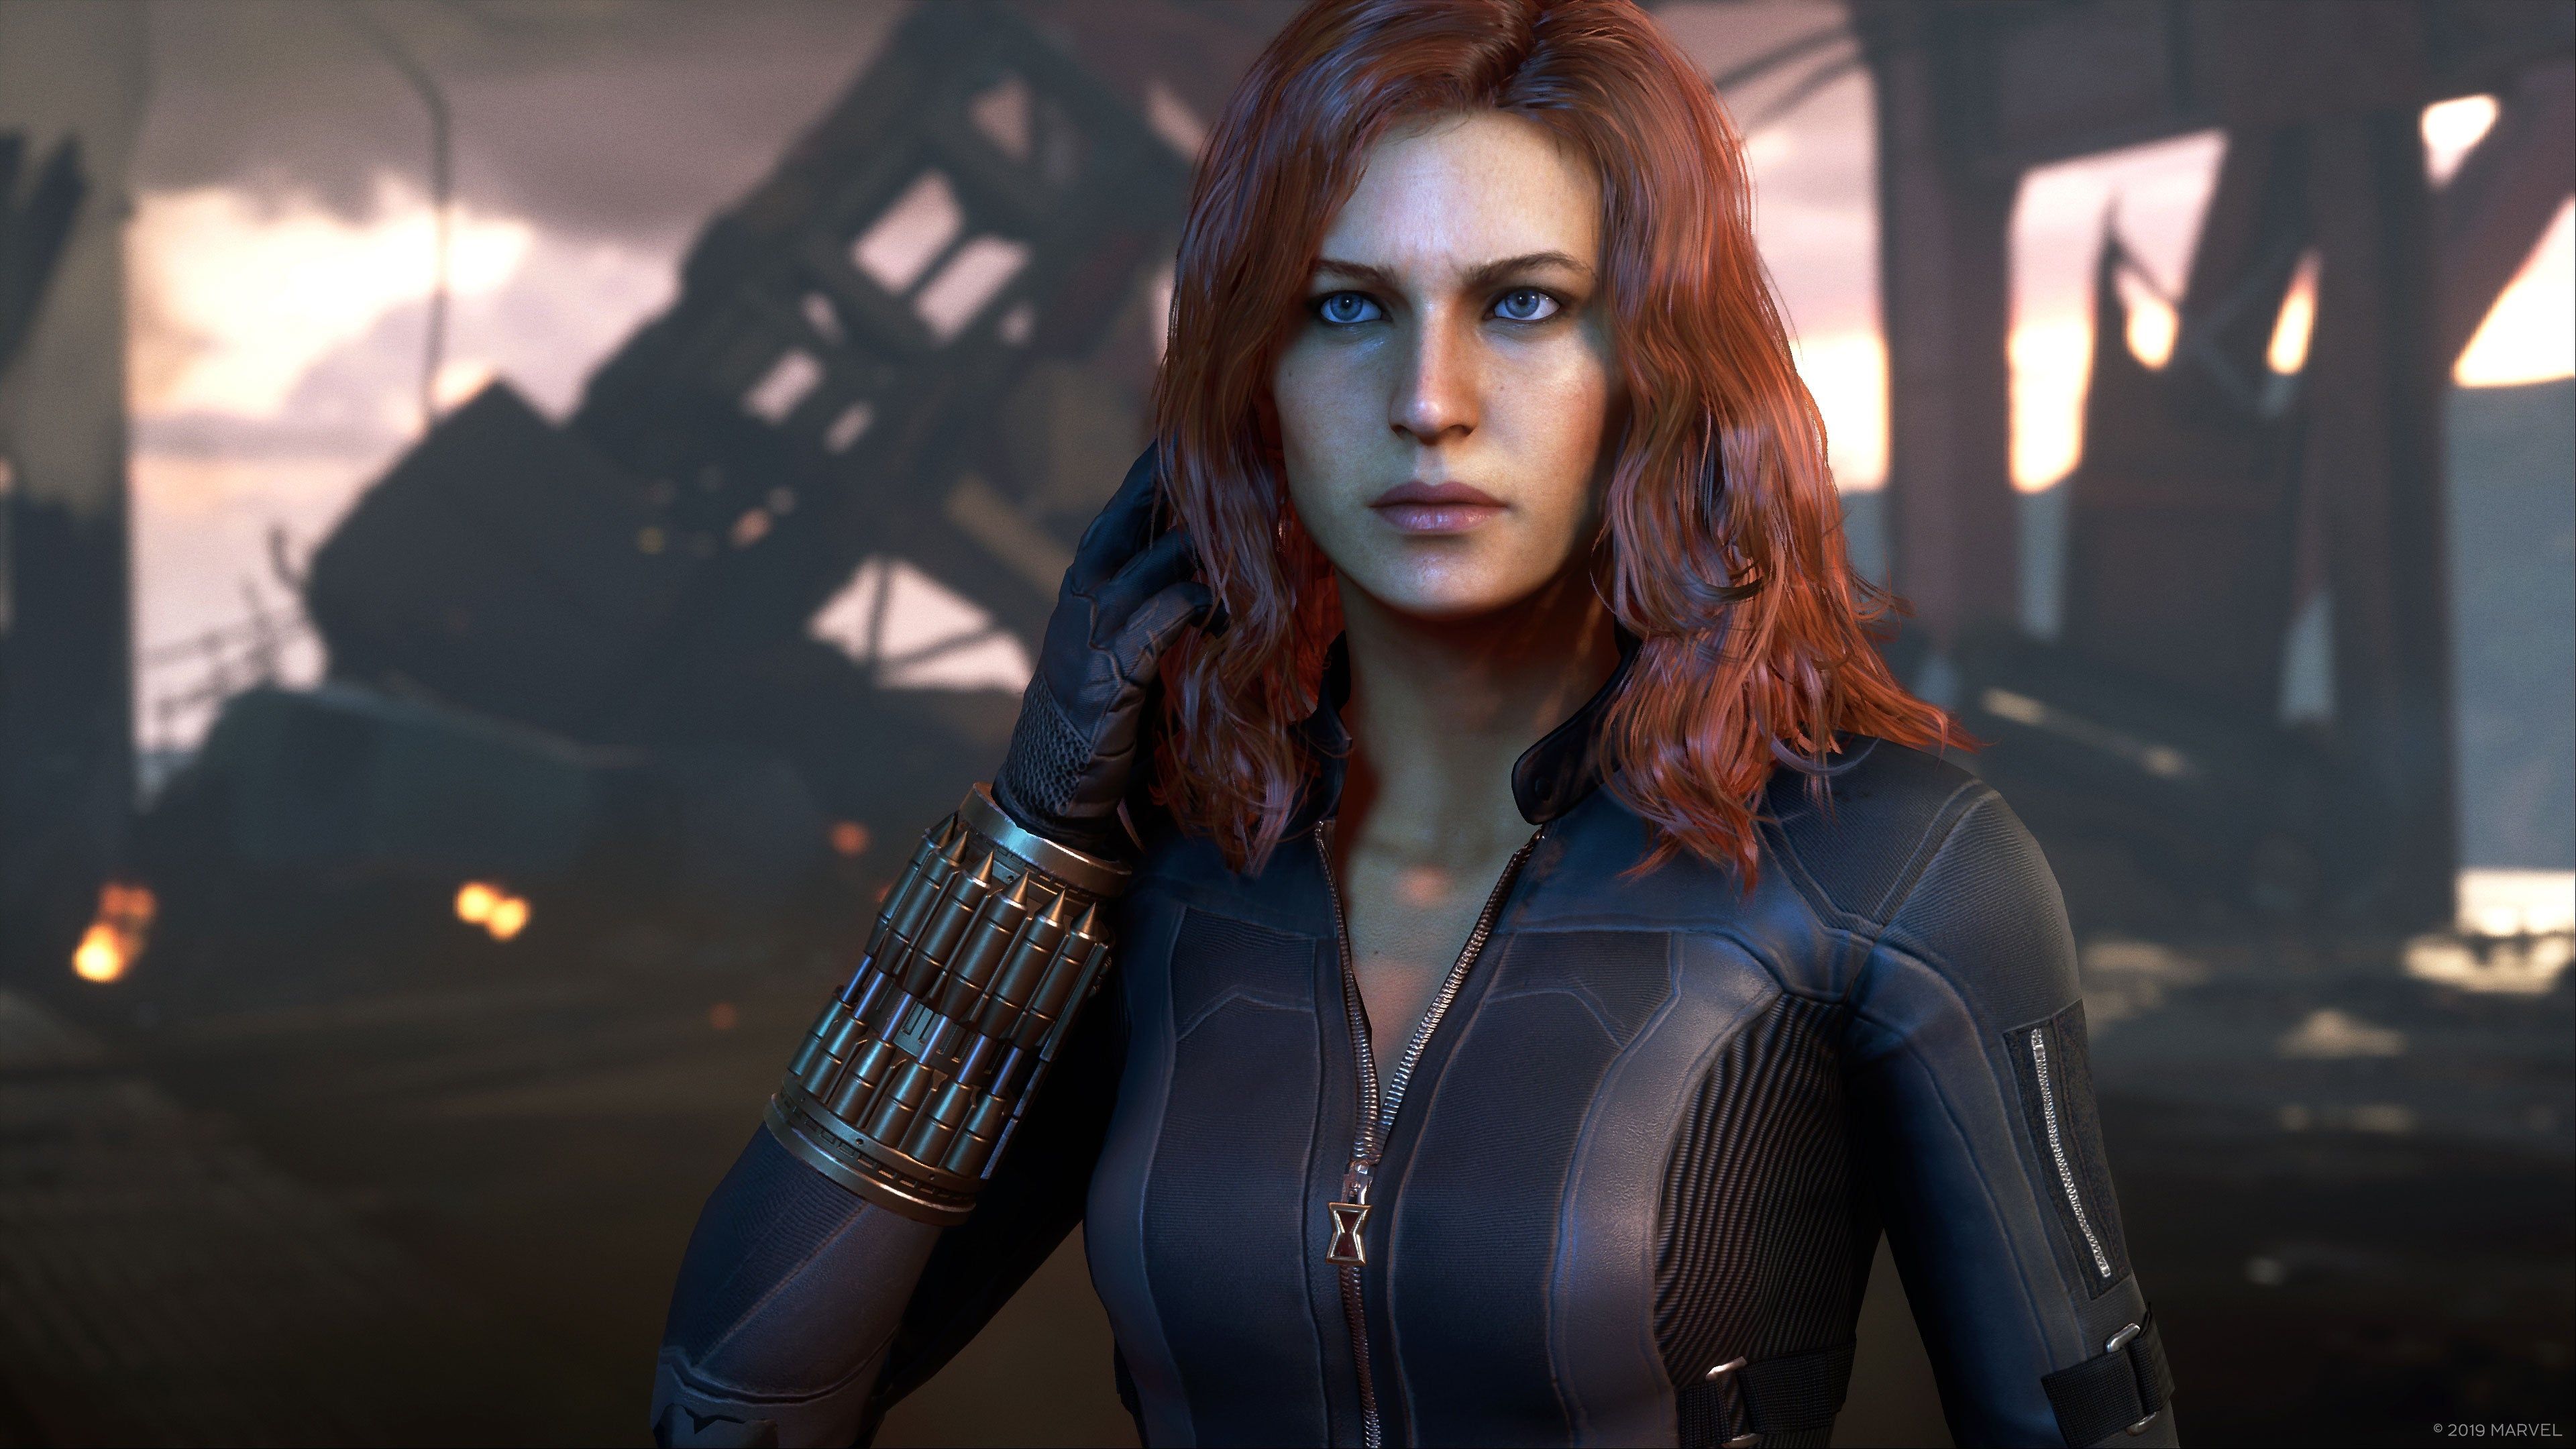 Black Widow Avengers Game 2020 2560x1080 Resolution Wallpaper, HD Games 4K Wallpaper, Image, Photo and Background